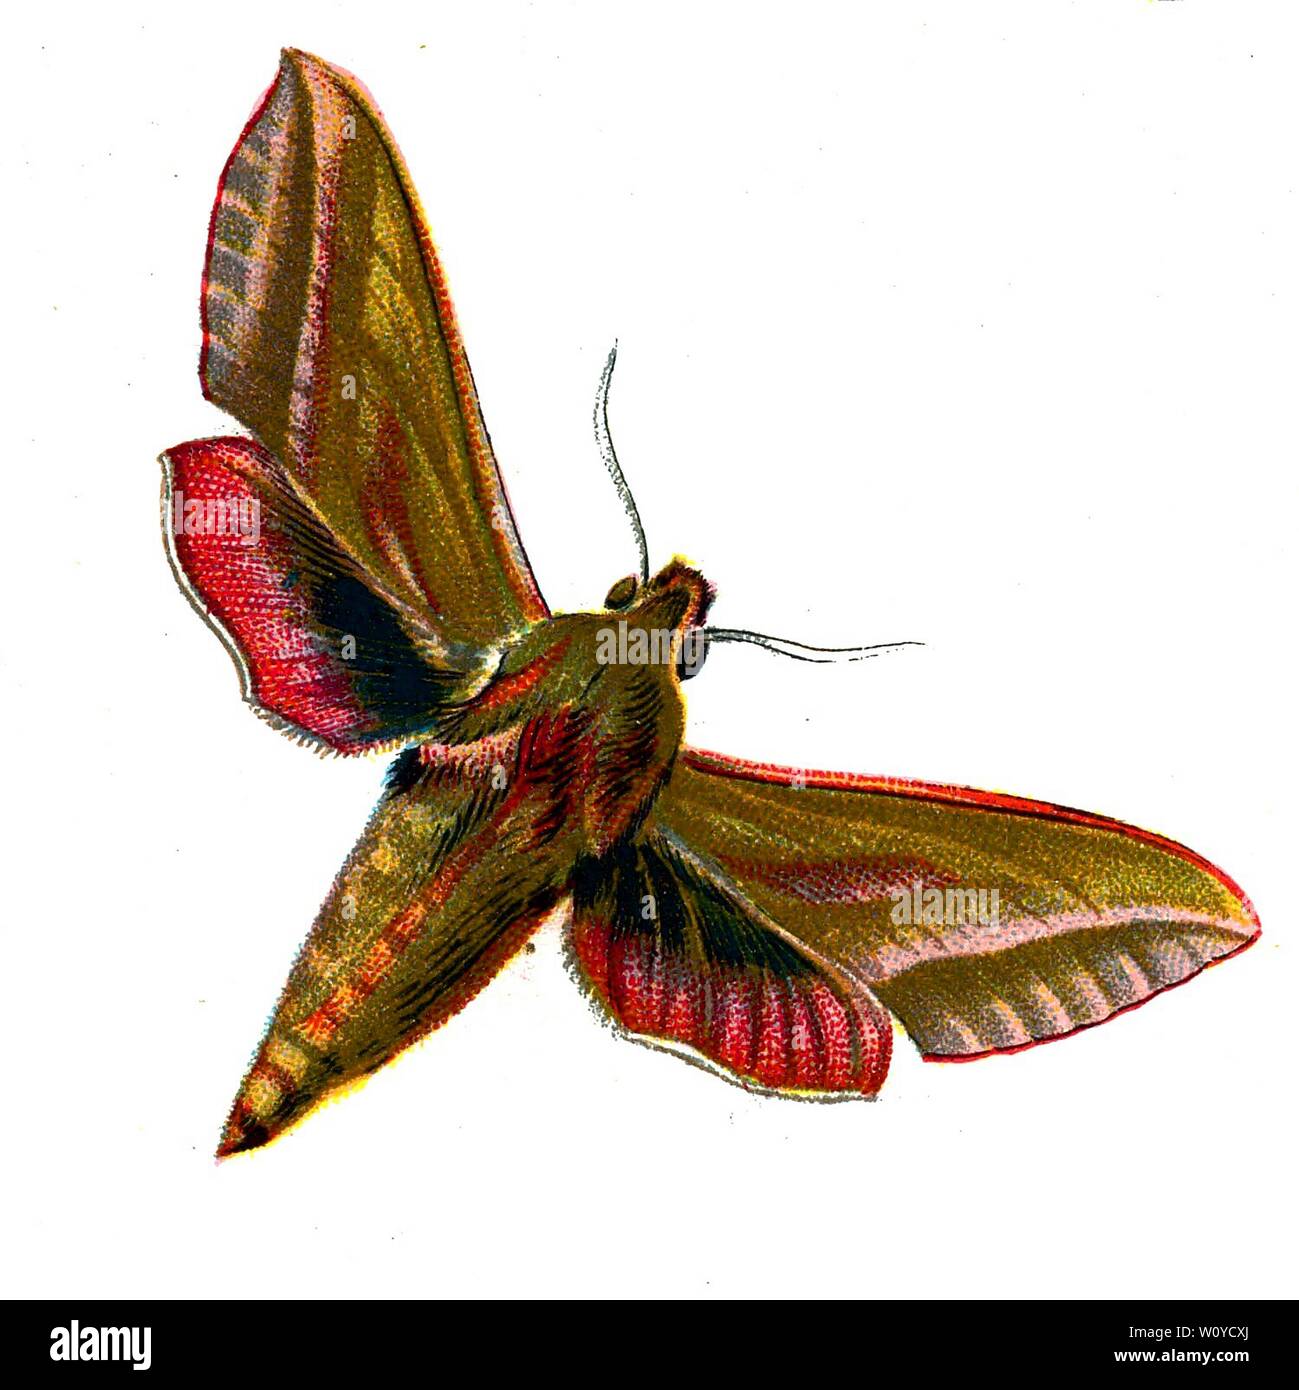 Deilephila elpenor, The Elephant Hawk Moth - Color Butterfly Lithograph from 1895 book, 'Europe’s Best-Known Butterflies' by F. Nemos Stock Photo